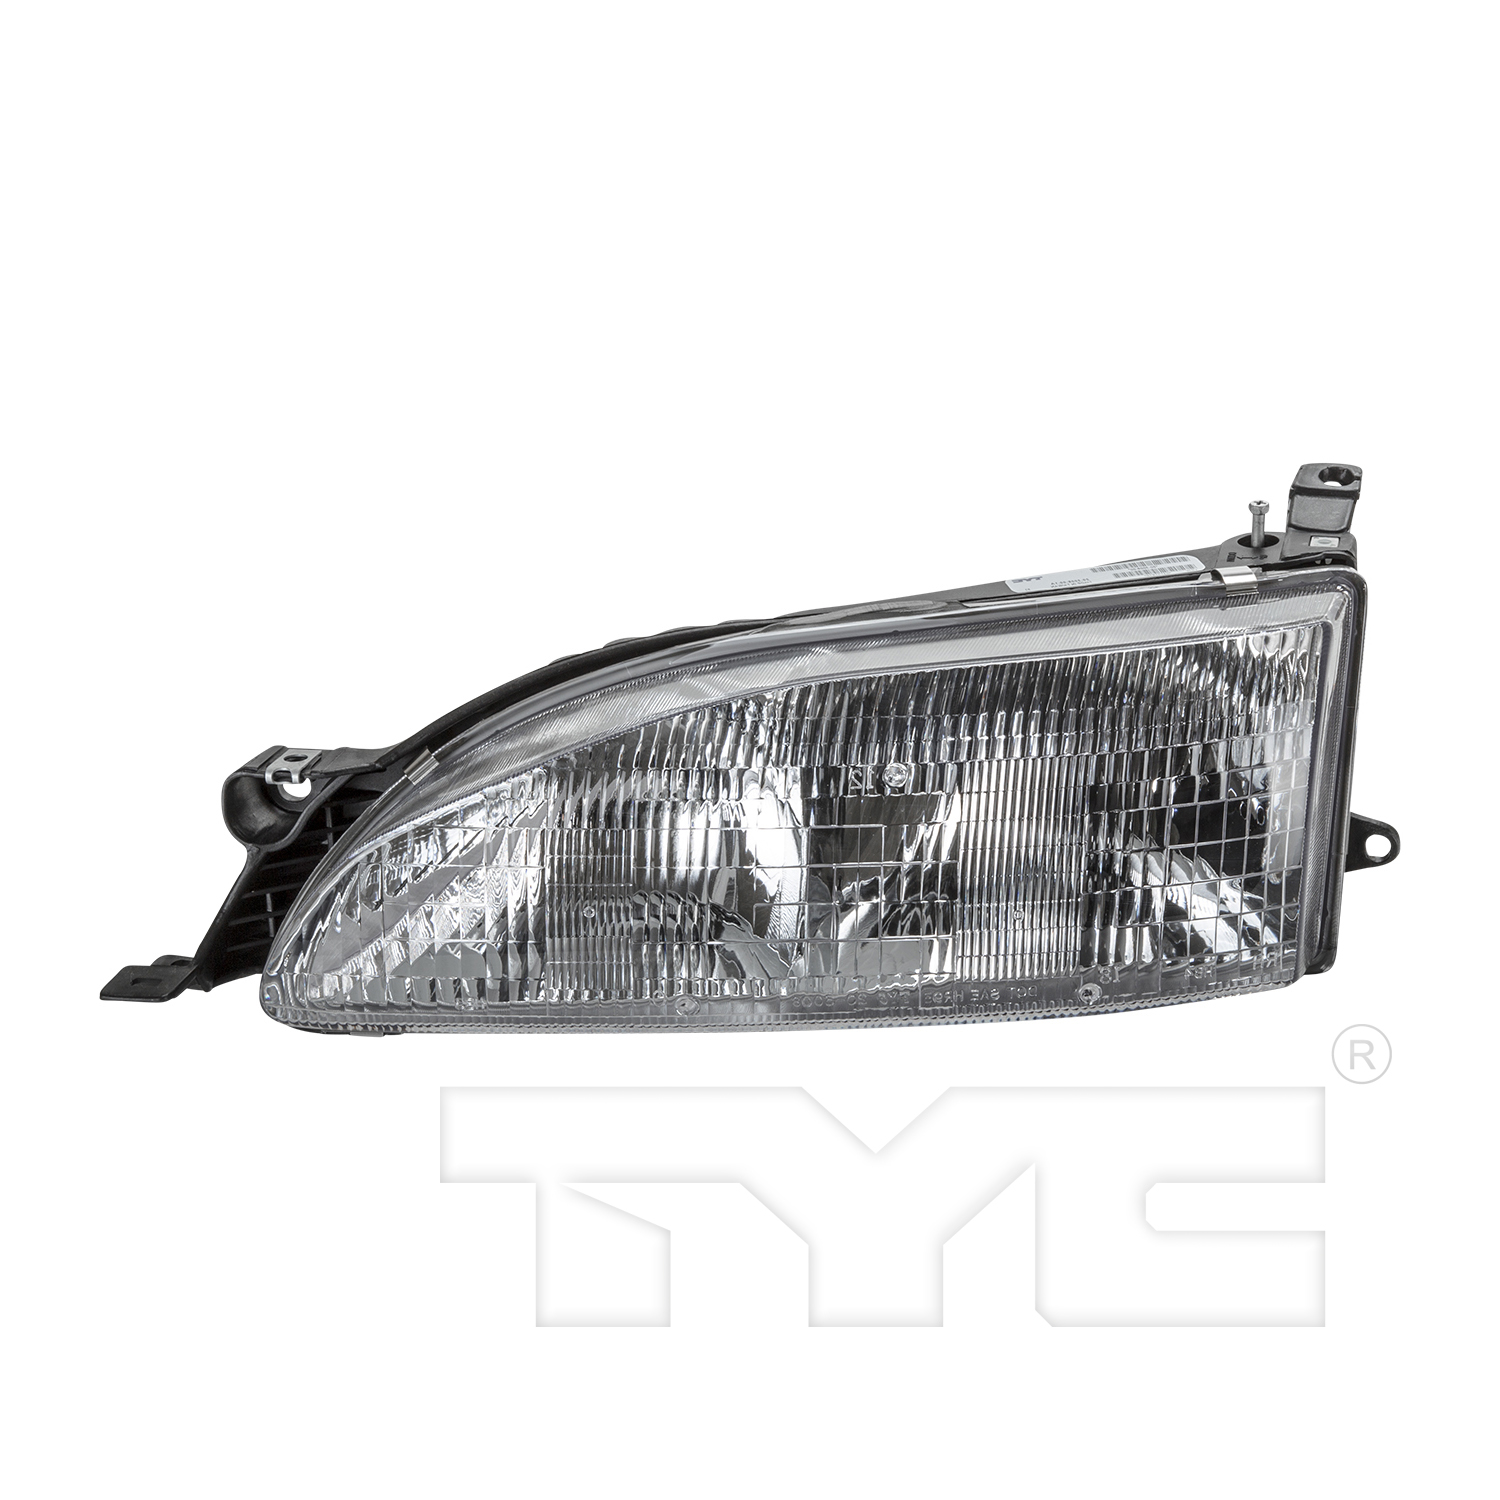 Aftermarket HEADLIGHTS for TOYOTA - CAMRY, CAMRY,95-96,LT Headlamp assy composite